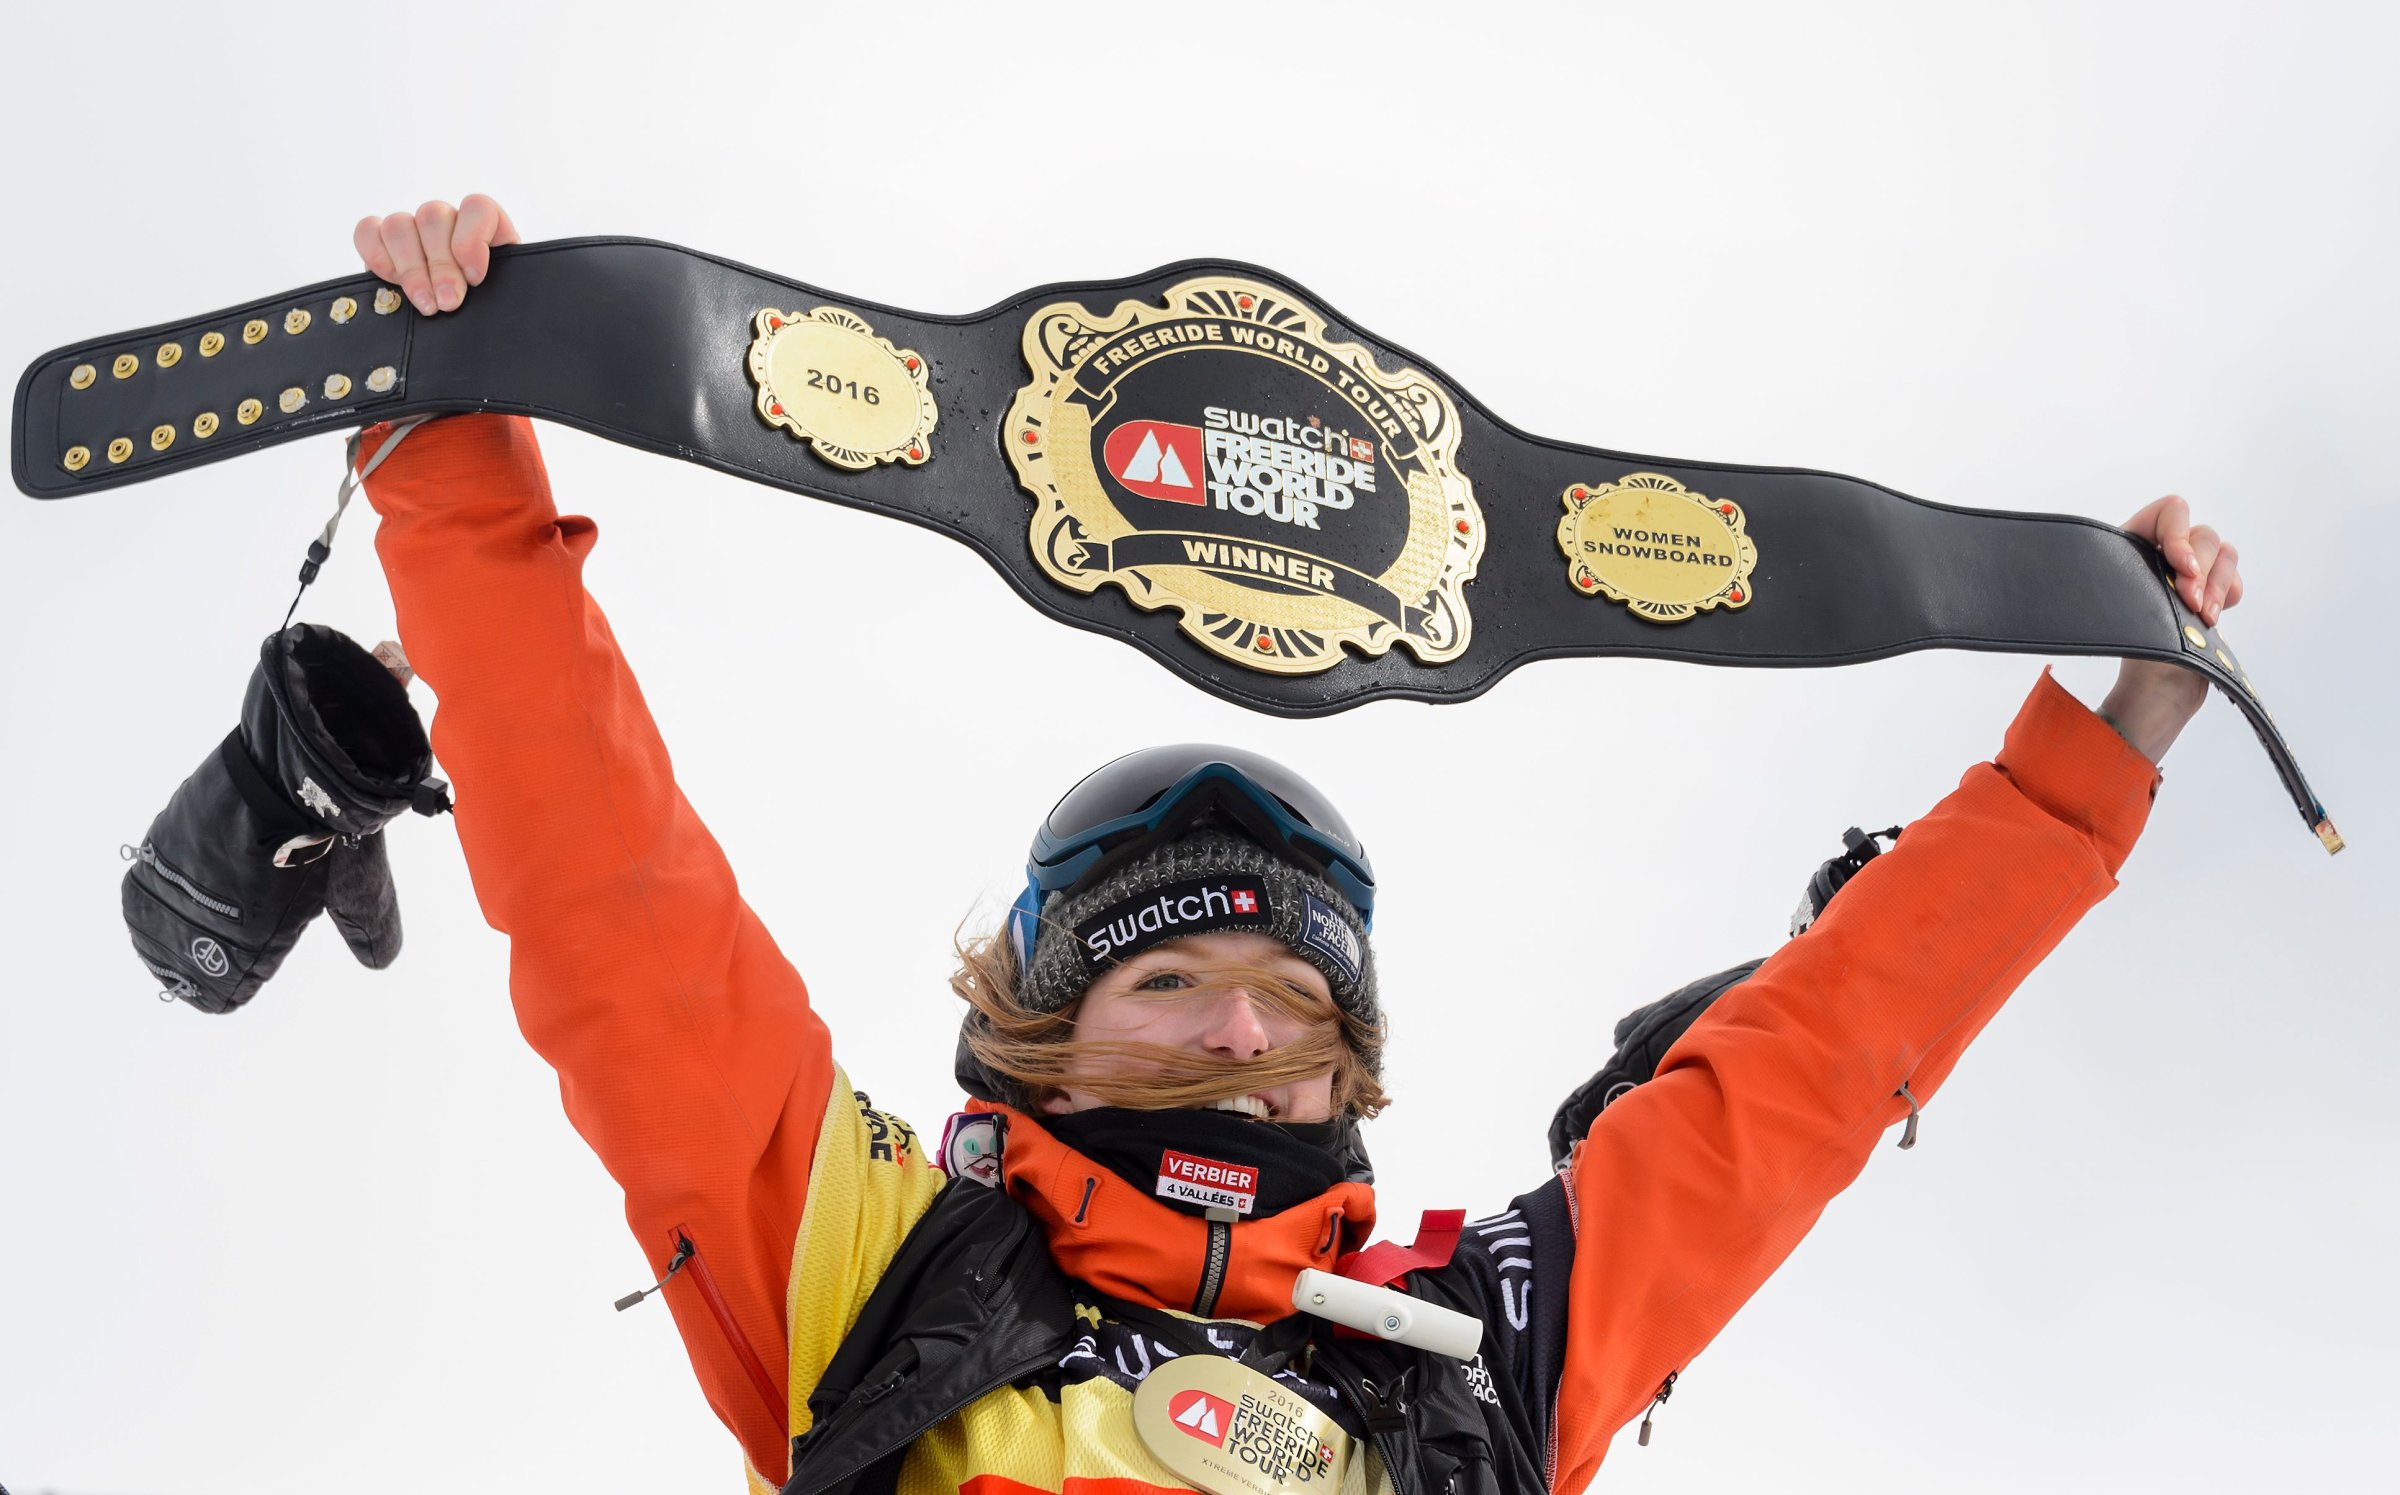 World champion Switzerland's Estelle Balet waves with the overall belt after she won the women's snowboard event at the Bec des Rosses during the Verbier Xtreme Freeride World Tour final on April 2, 2016 above the Swiss Alps resort of Verbier.